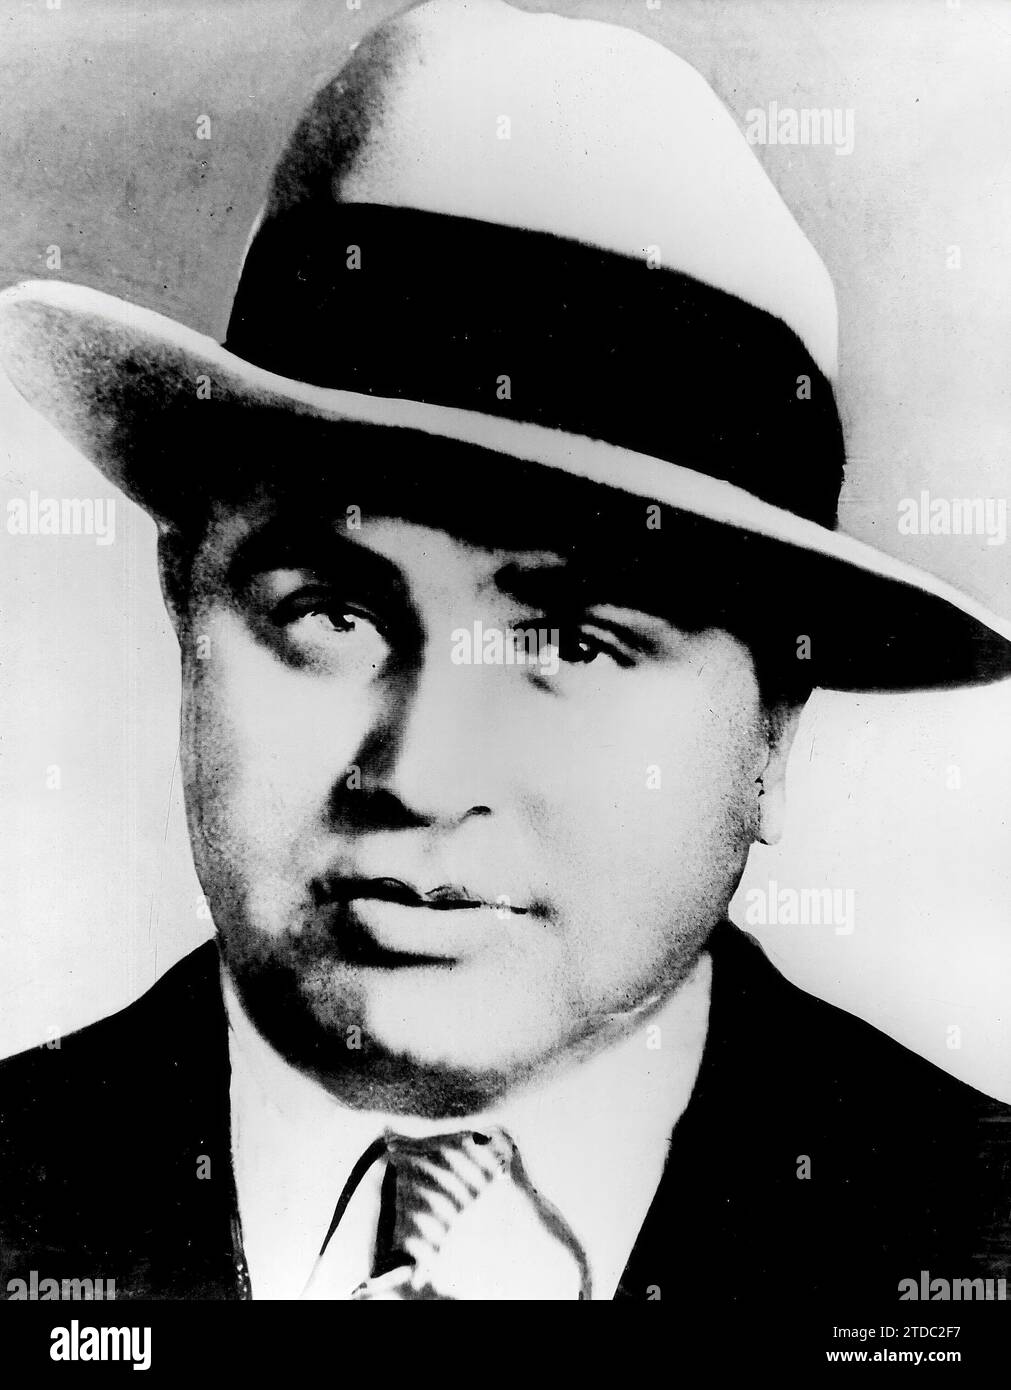 Al Capone, one of the most important Chicago gangsters, in 1920. Credit: Album / Archivo ABC Stock Photo